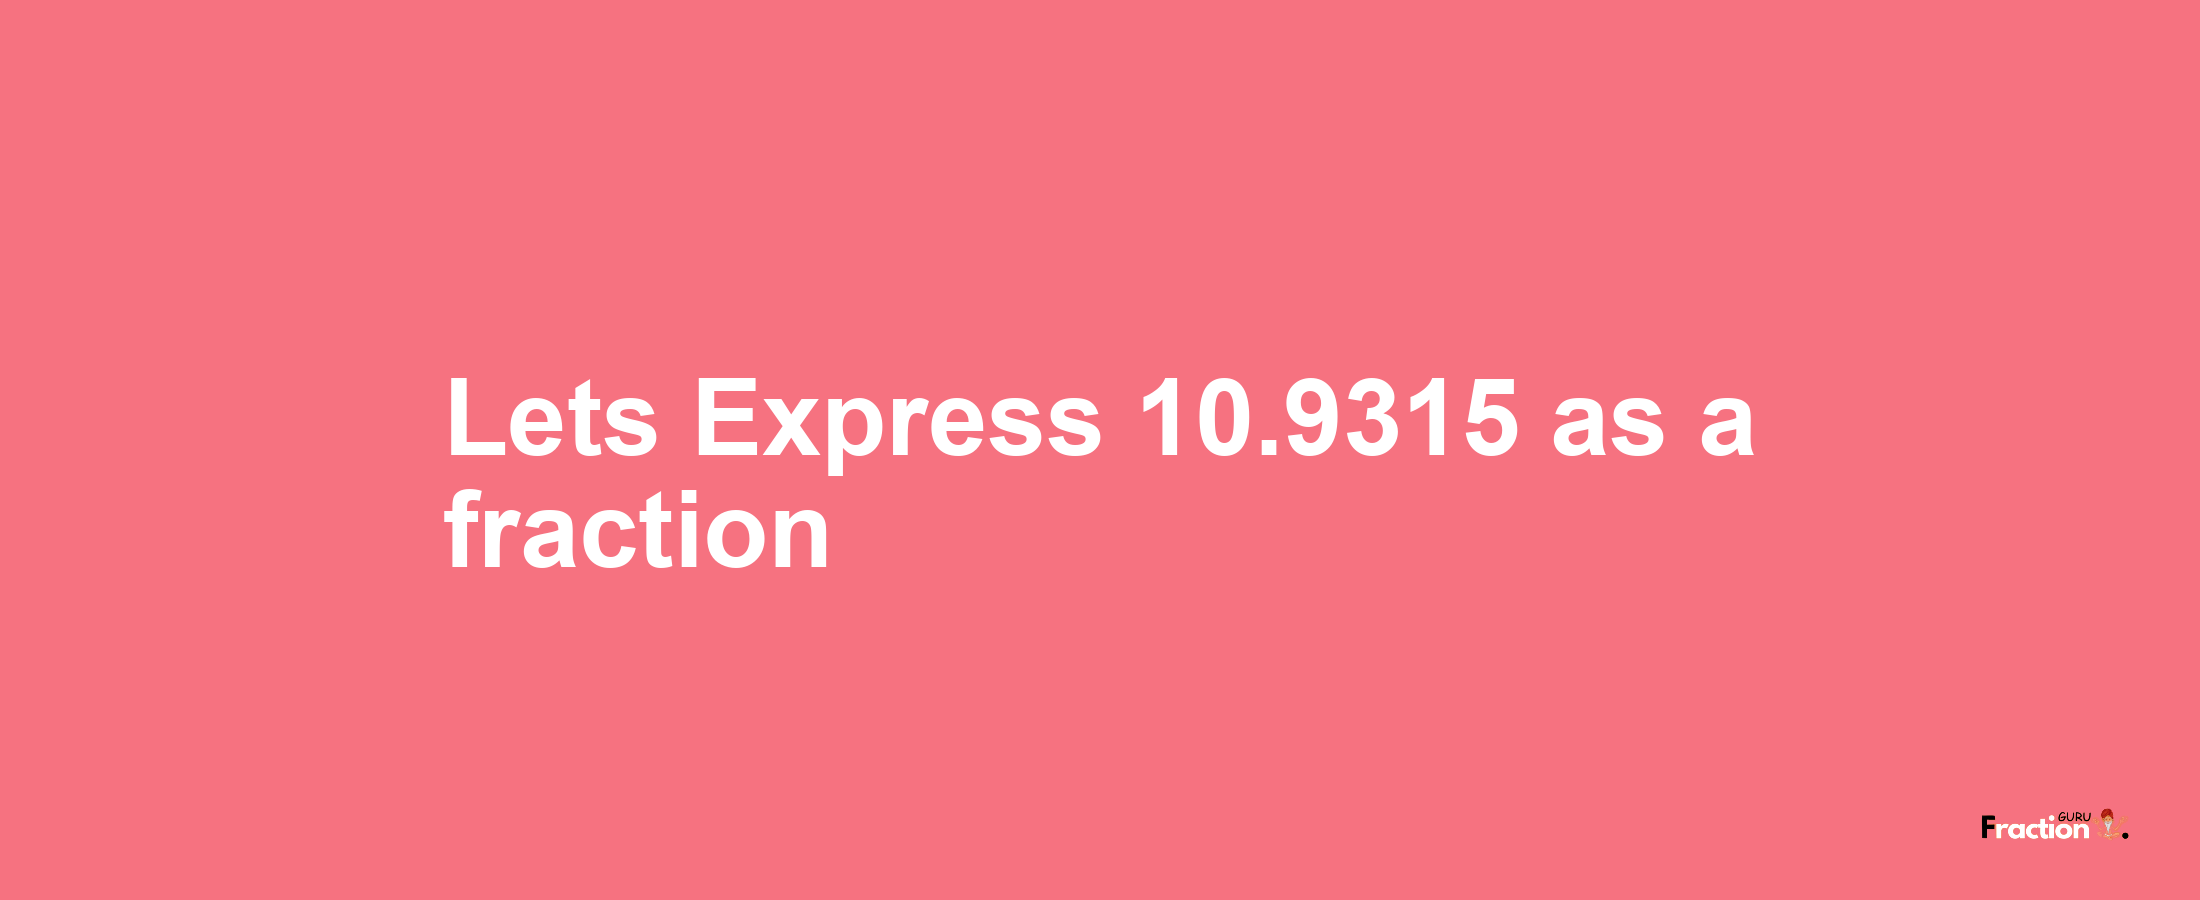 Lets Express 10.9315 as afraction